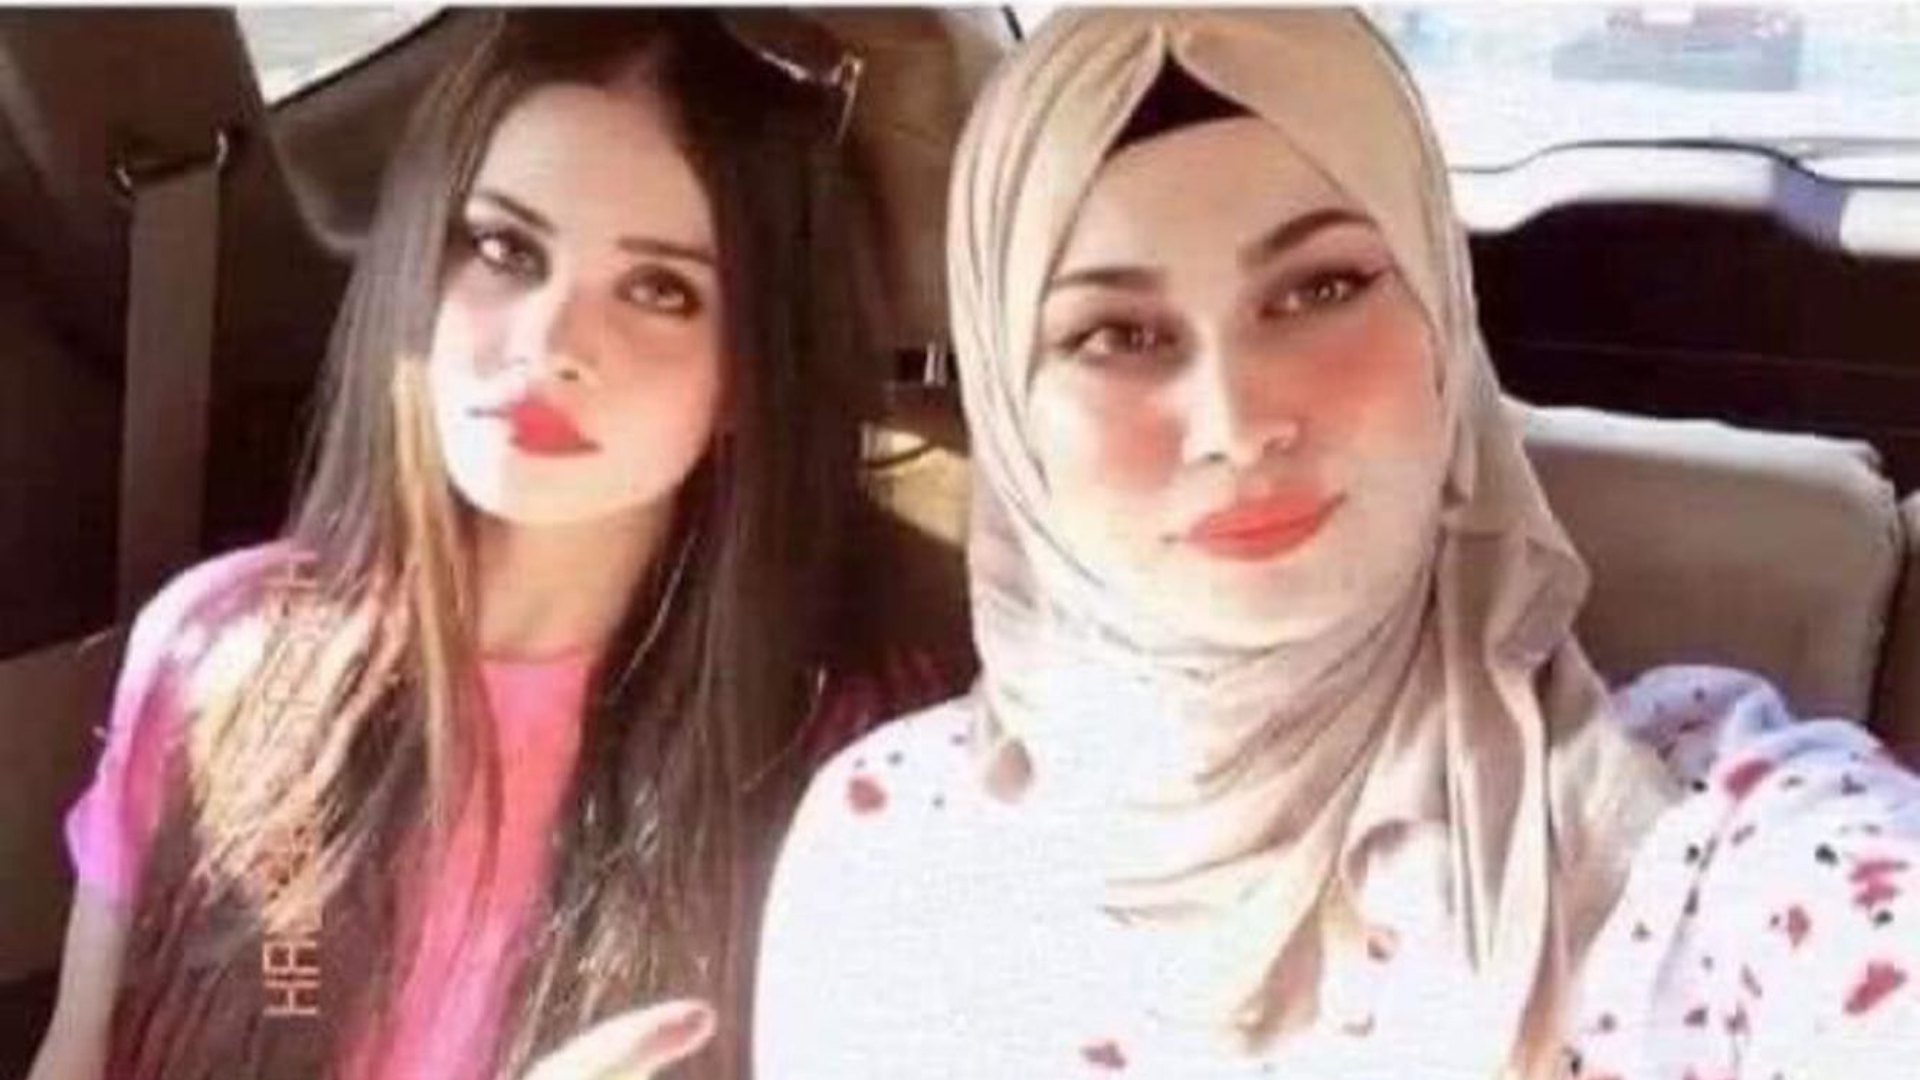 Killing of Iraqi sisters by drunken brother sparks outrage